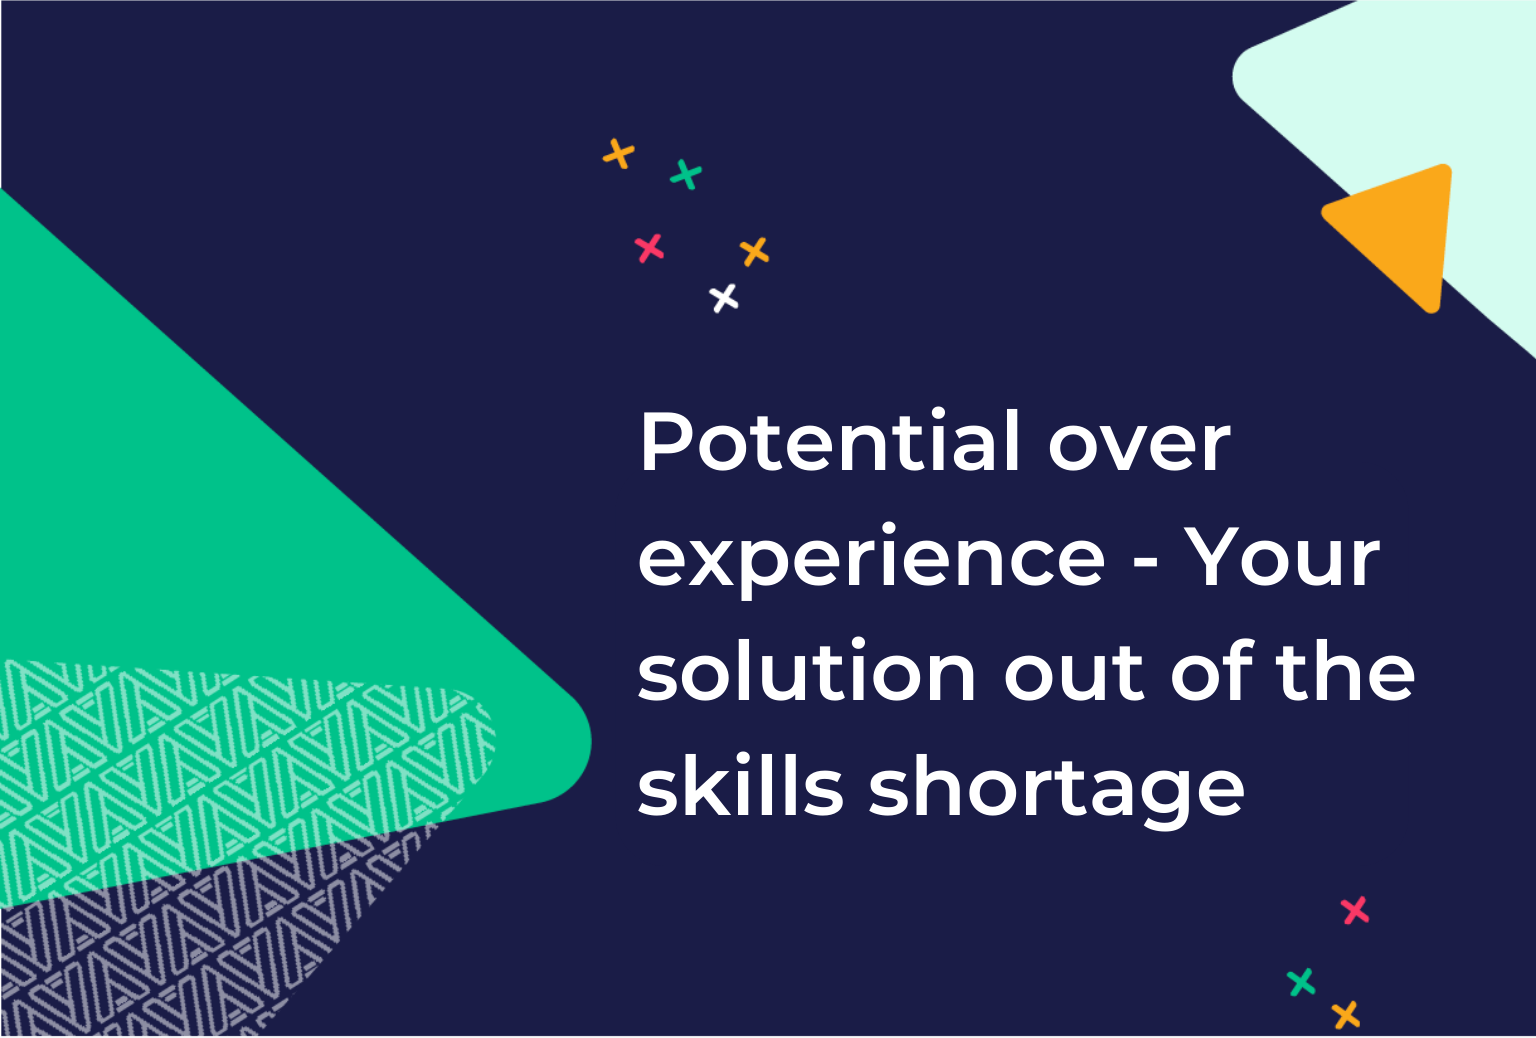 Potential over experience - your solution out of the skills shortage